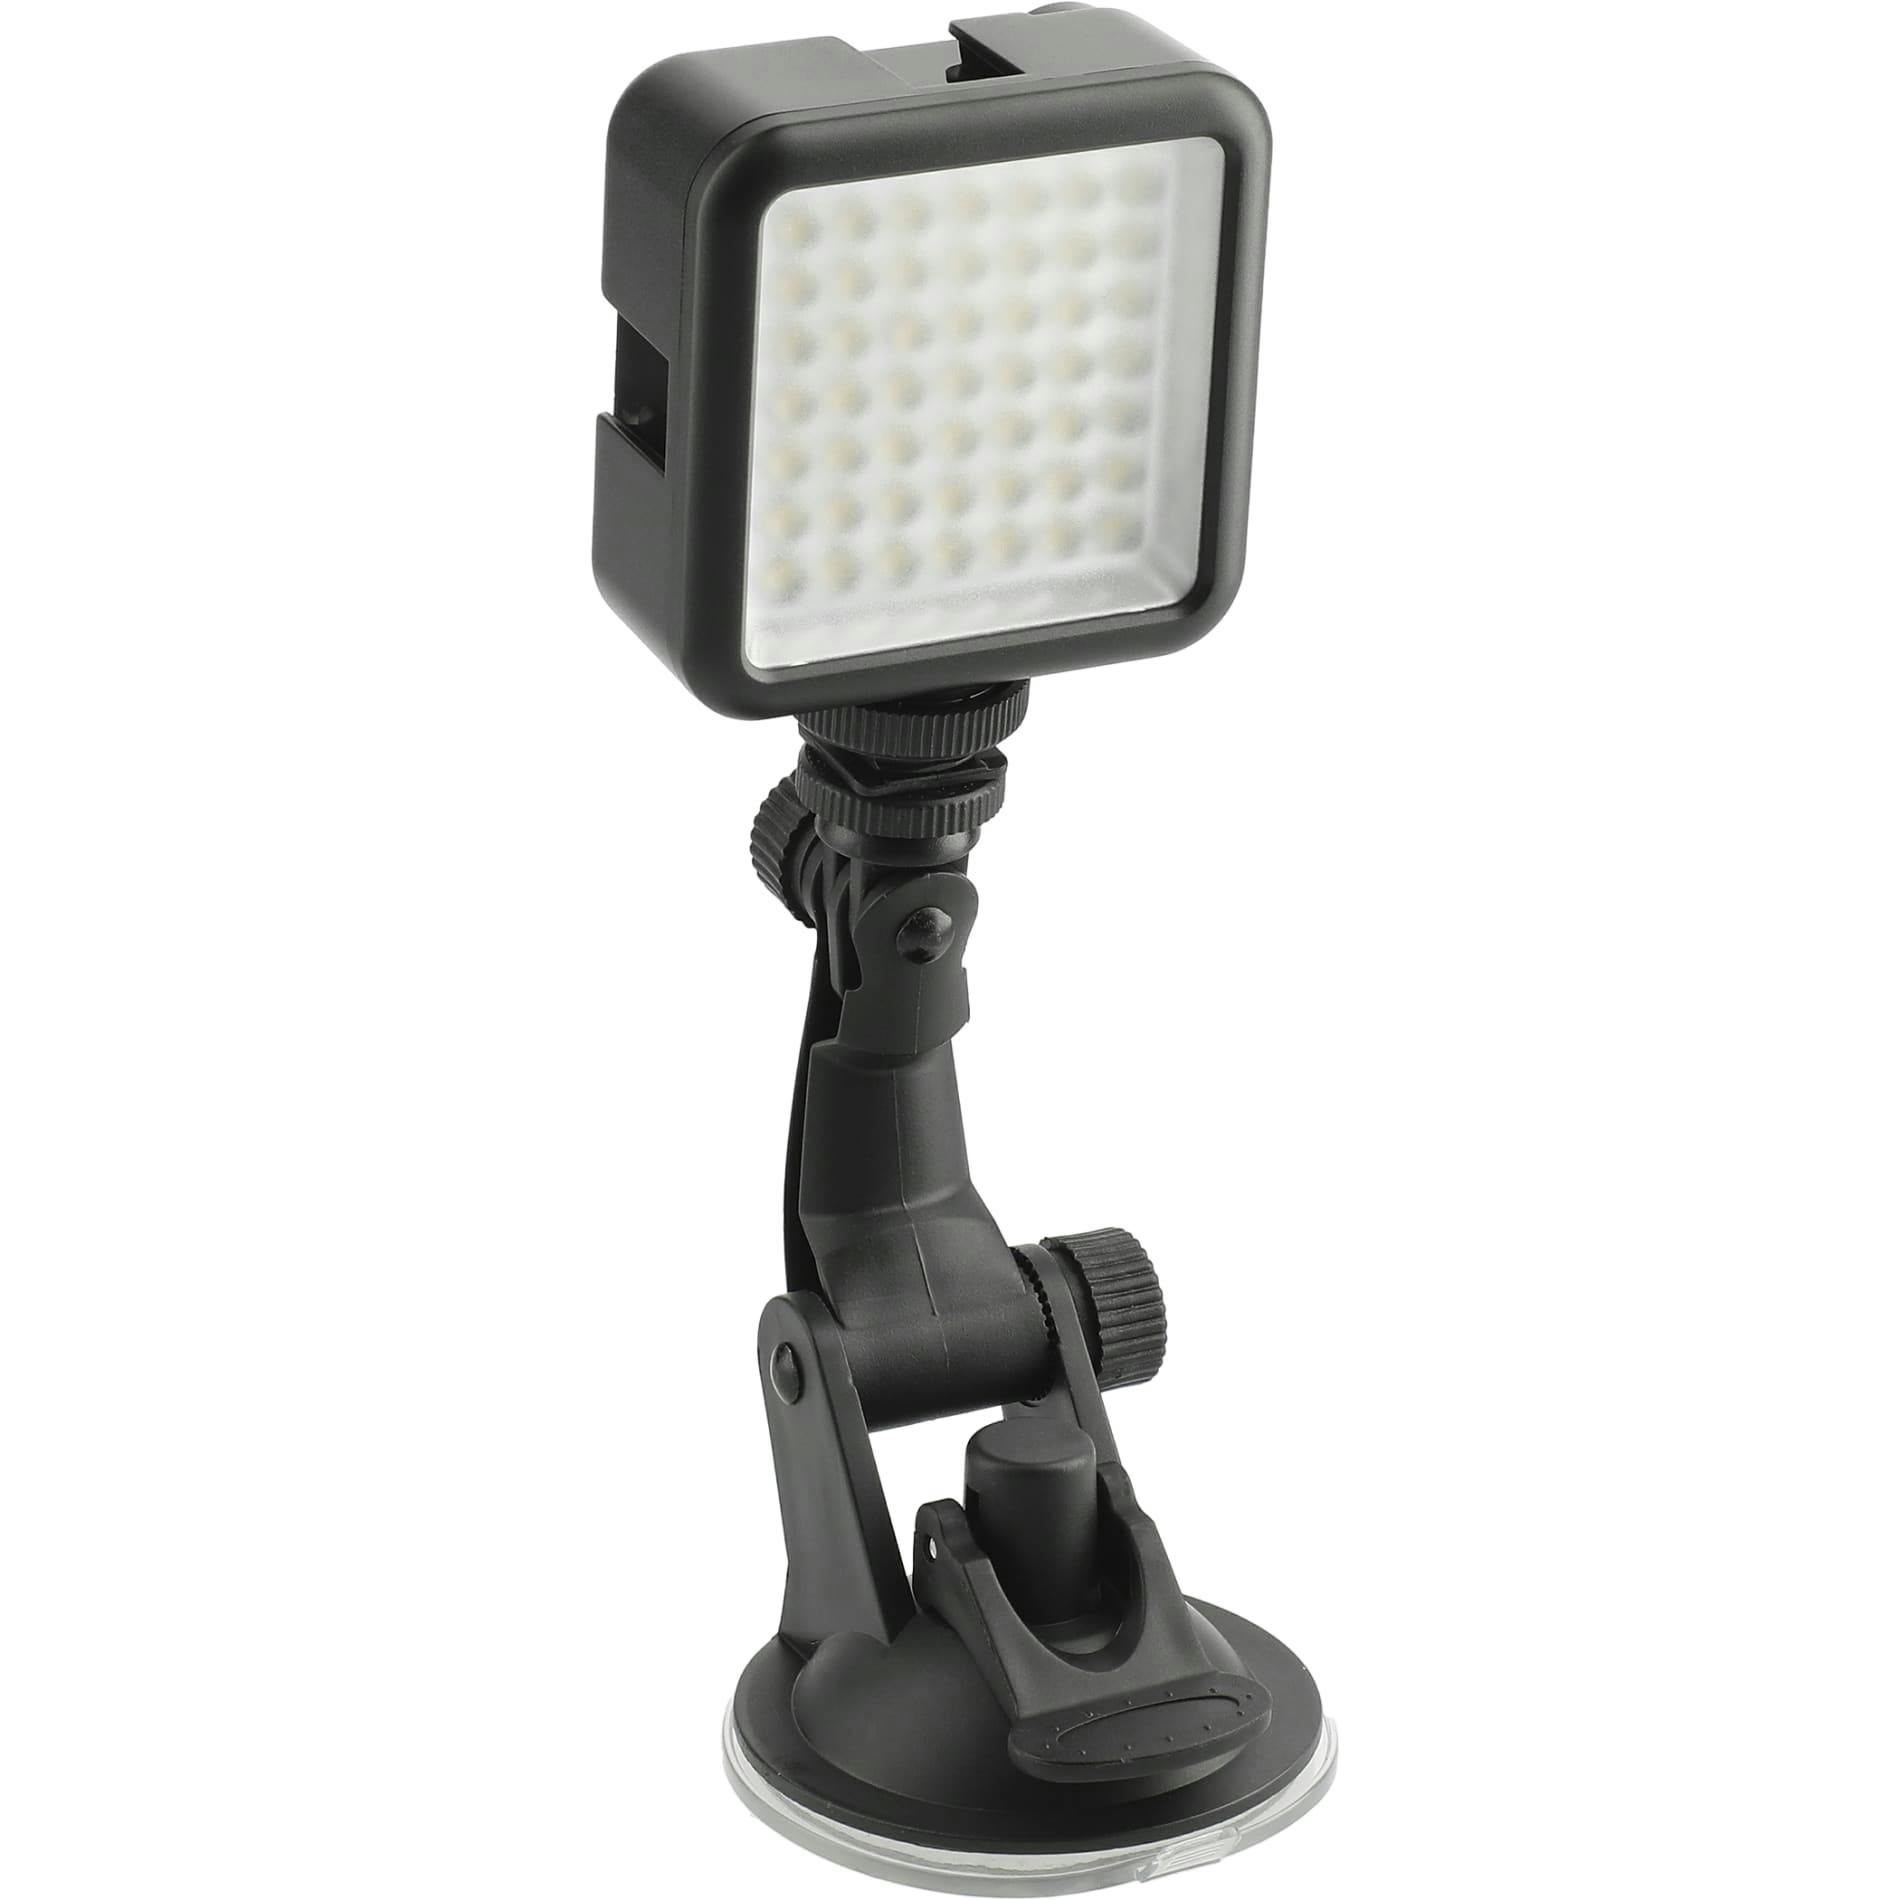 Laptop & Tablet Portable Video Light - additional Image 2